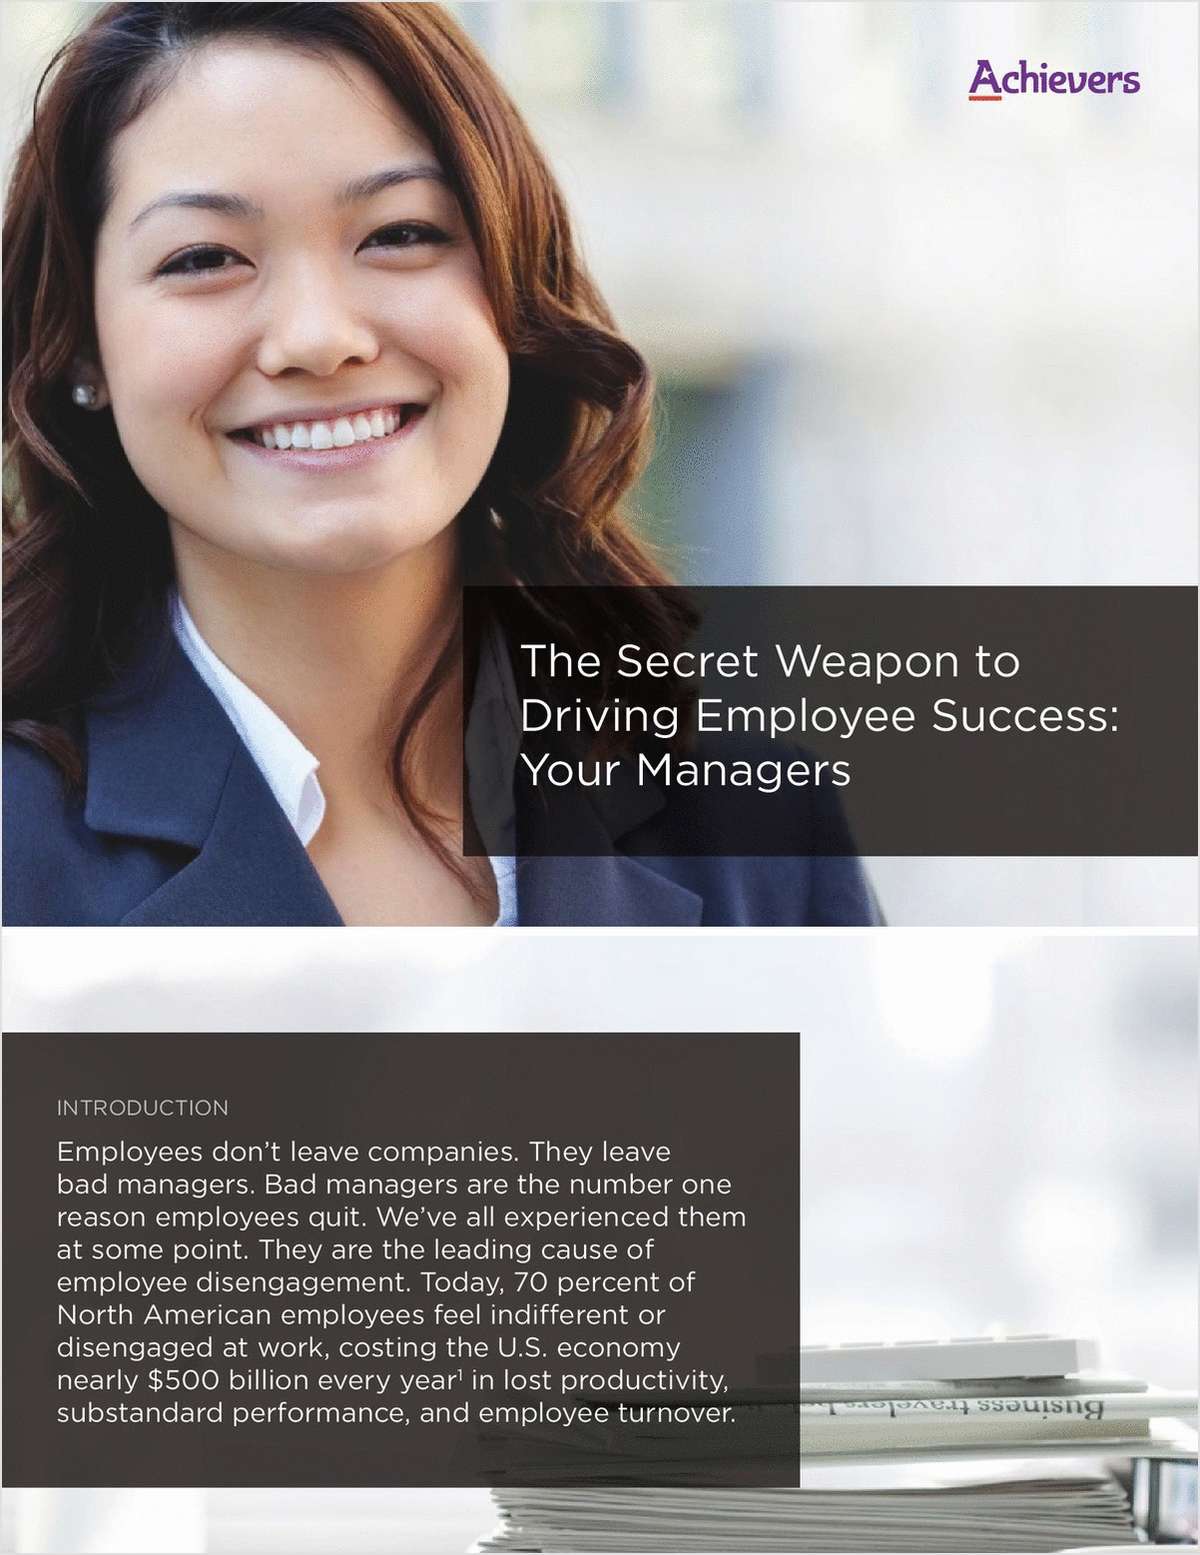 The Secret Weapon to Driving Employee Success